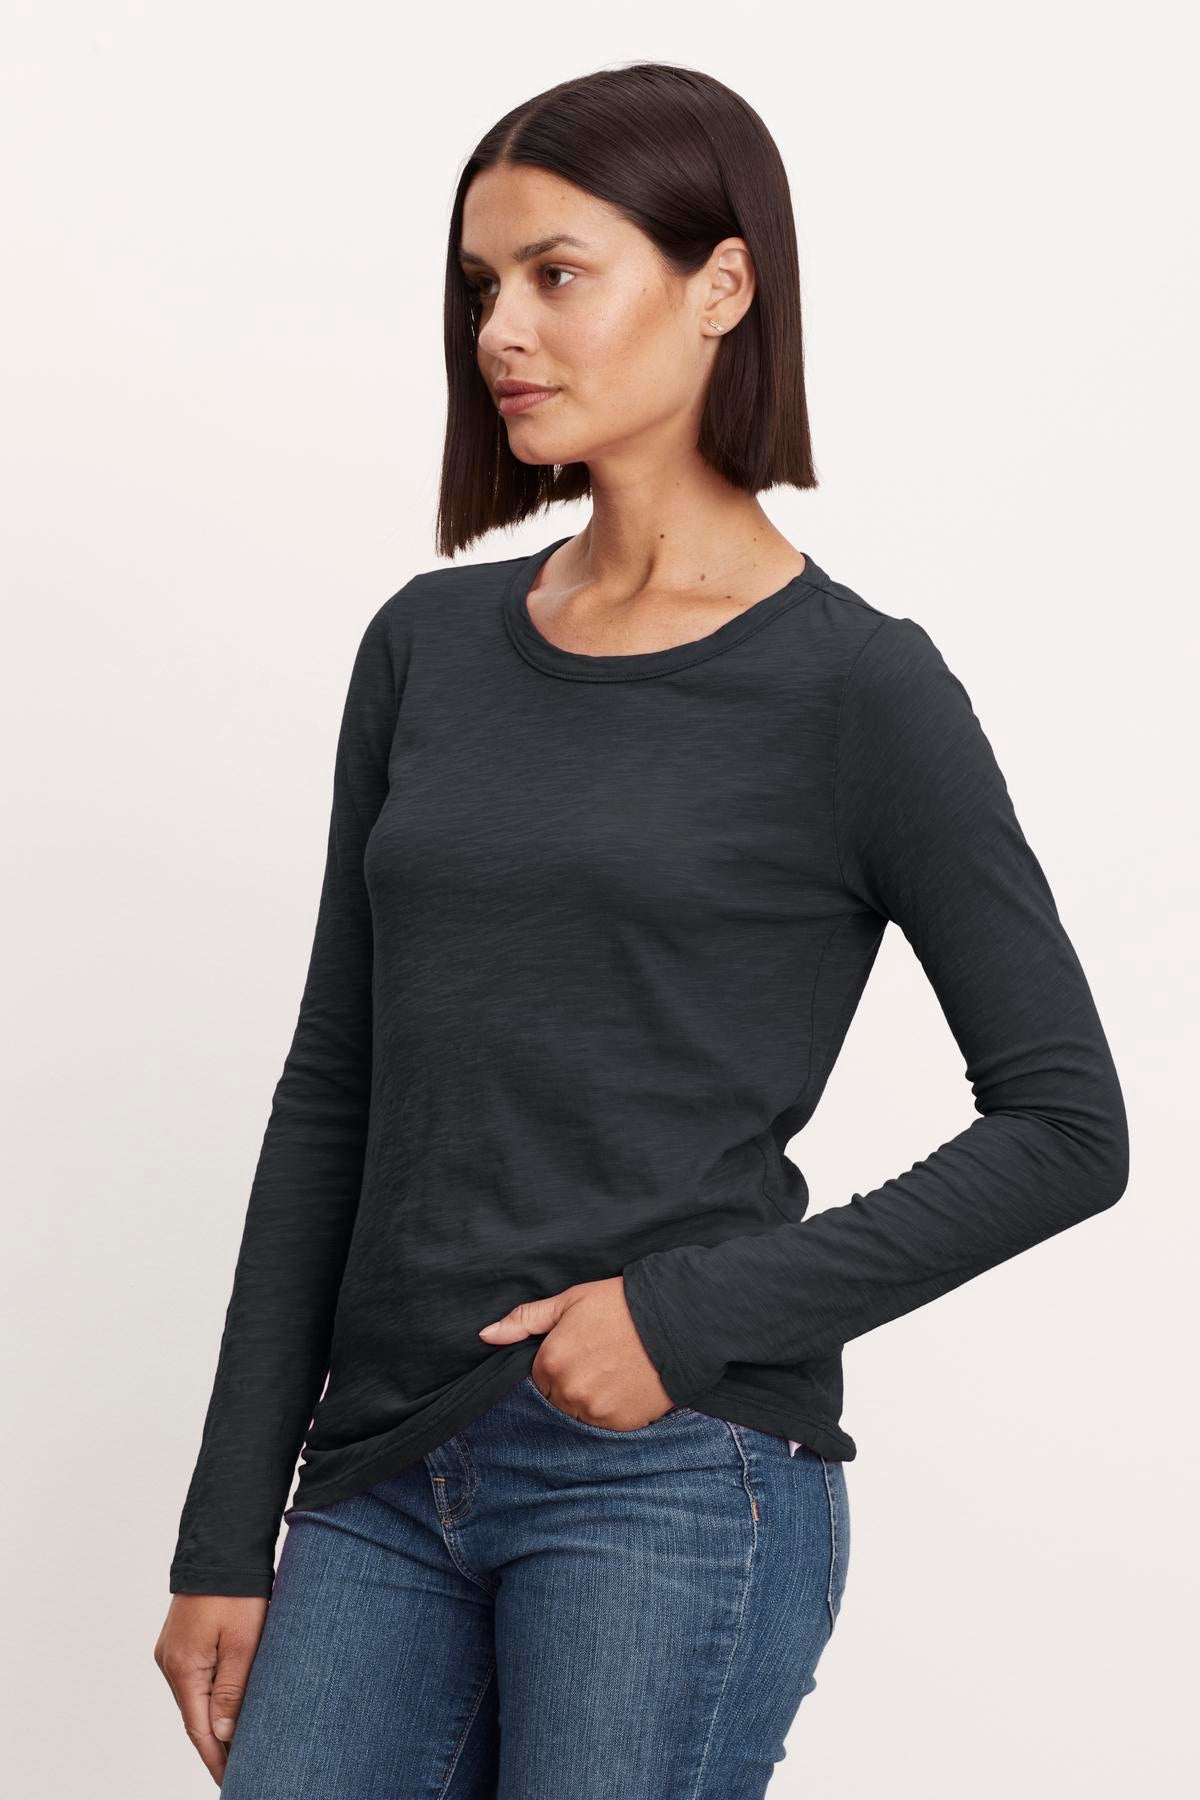 A woman wearing jeans and a Velvet by Graham & Spencer LIZZIE ORIGINAL SLUB LONG SLEEVE TEE.-35782988693697